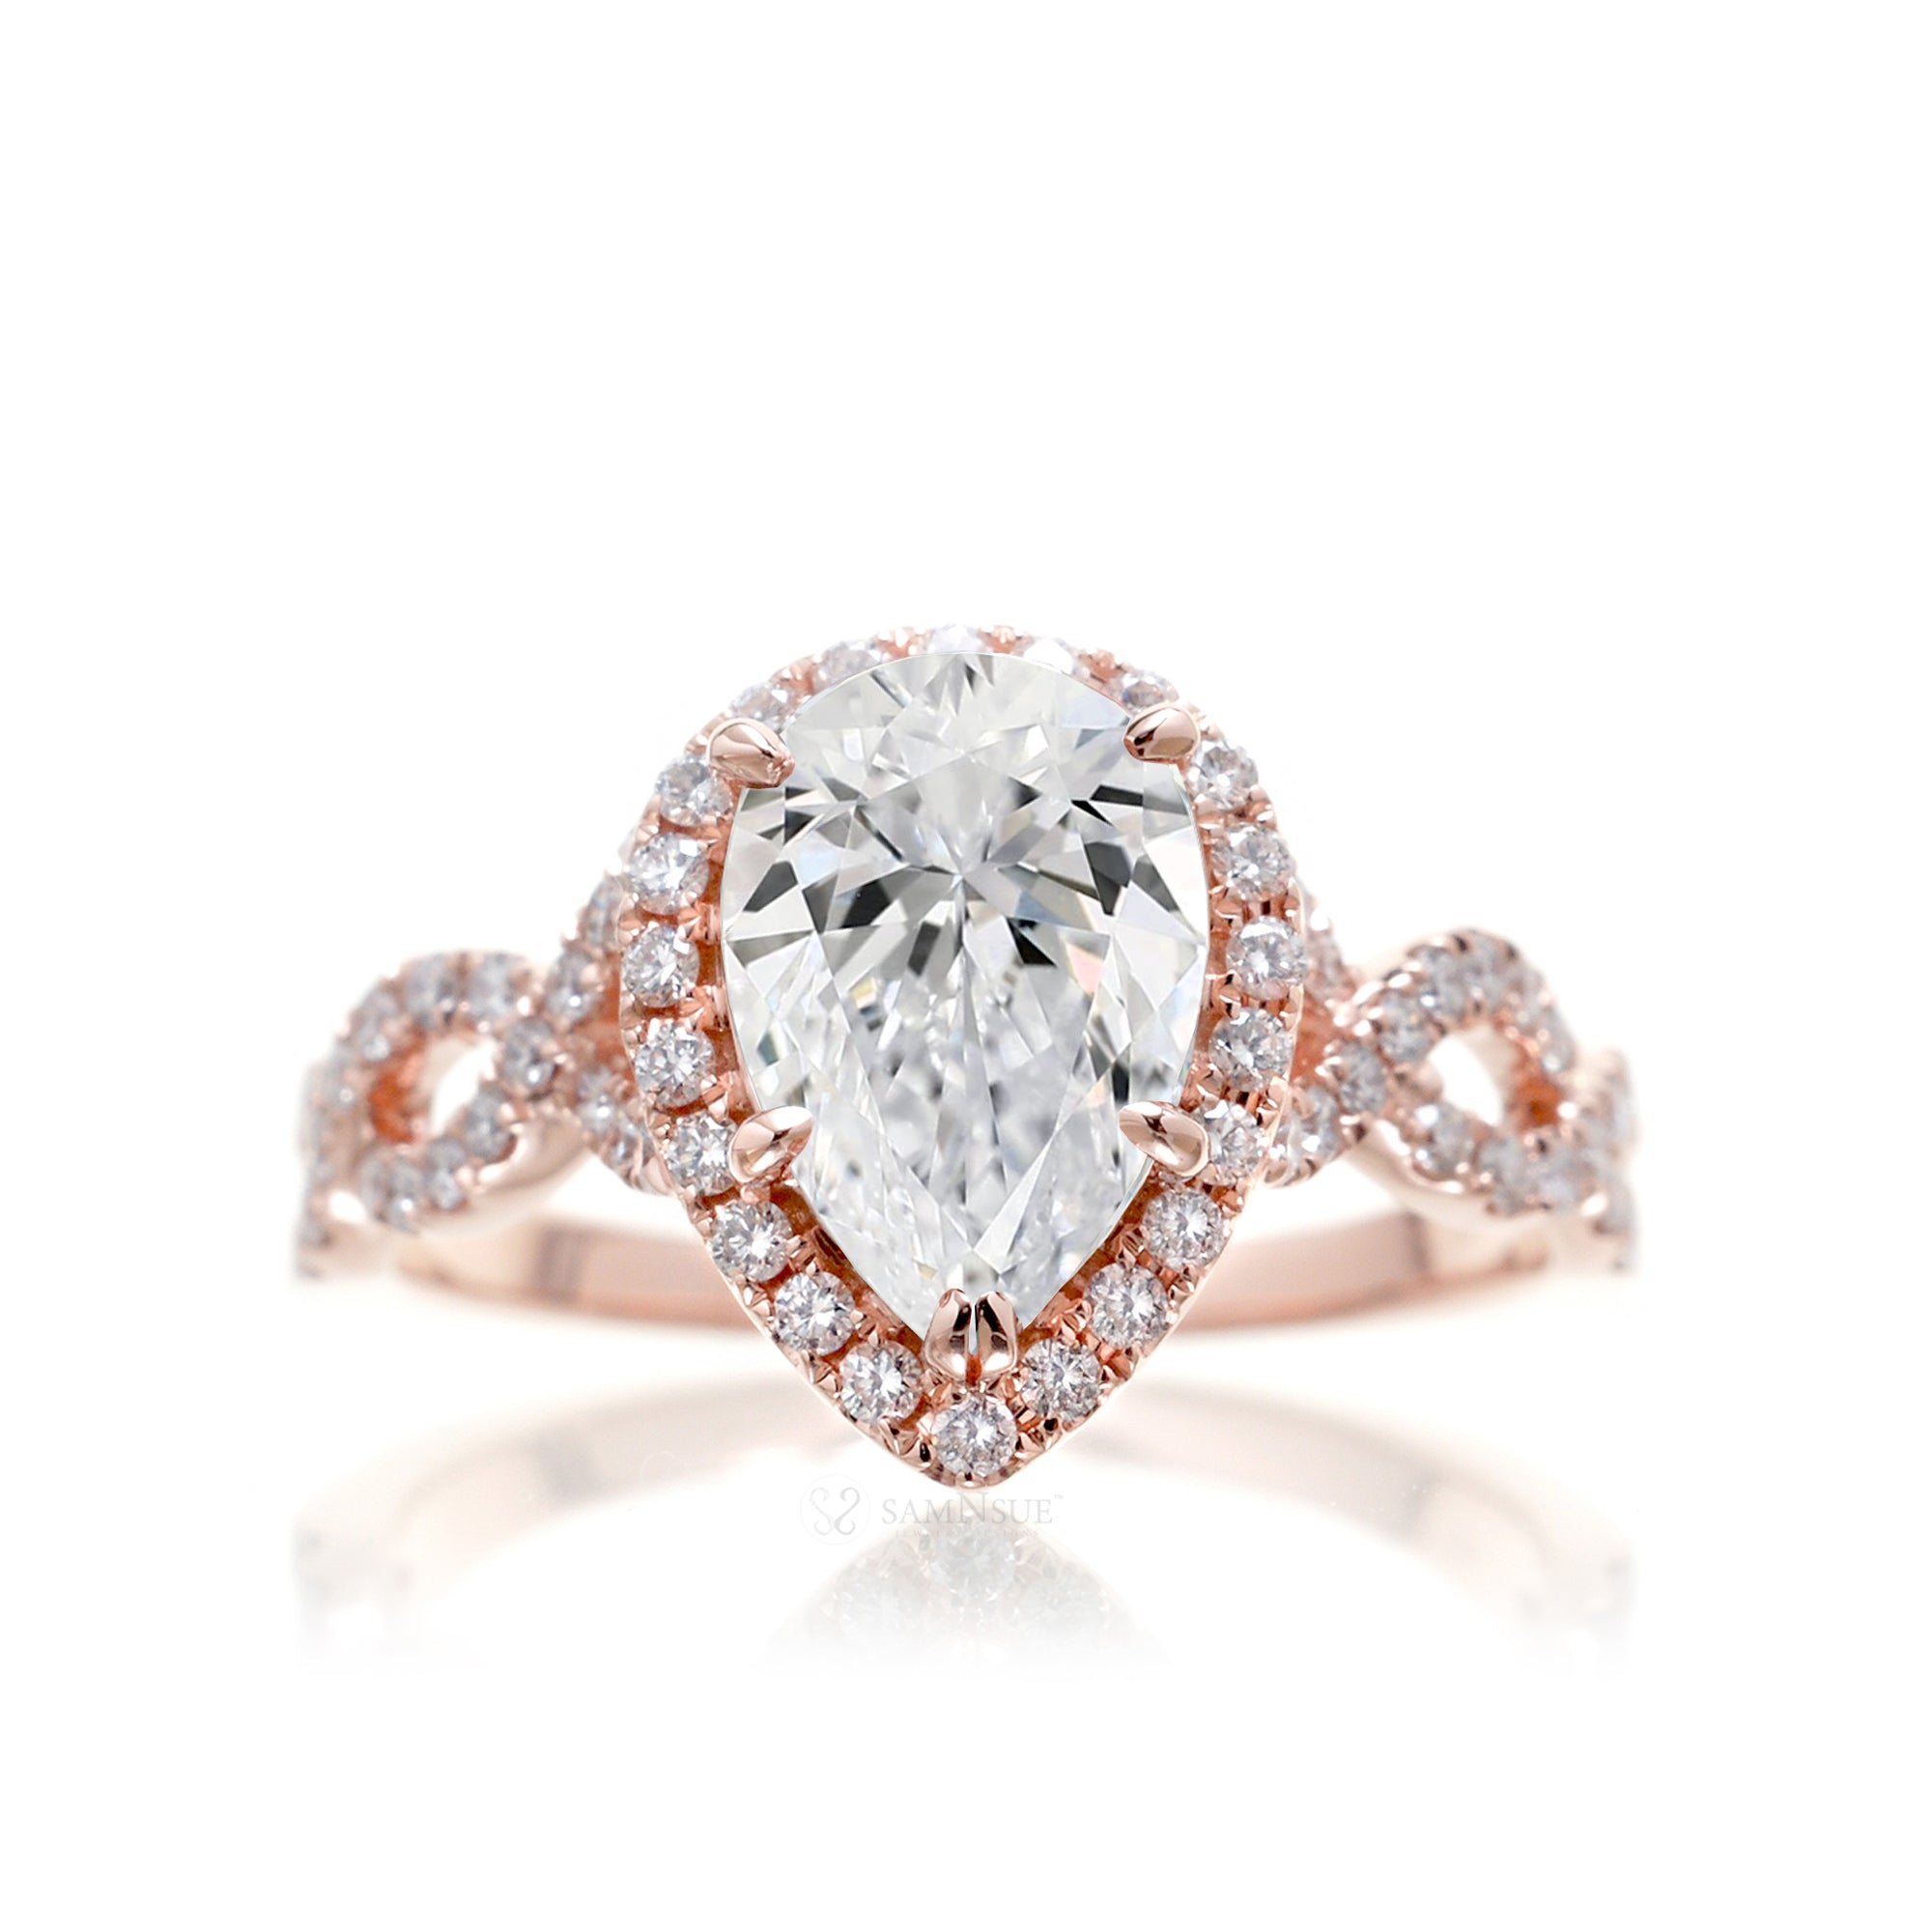 Pear diamond engagement ring halo and twist band rose gold